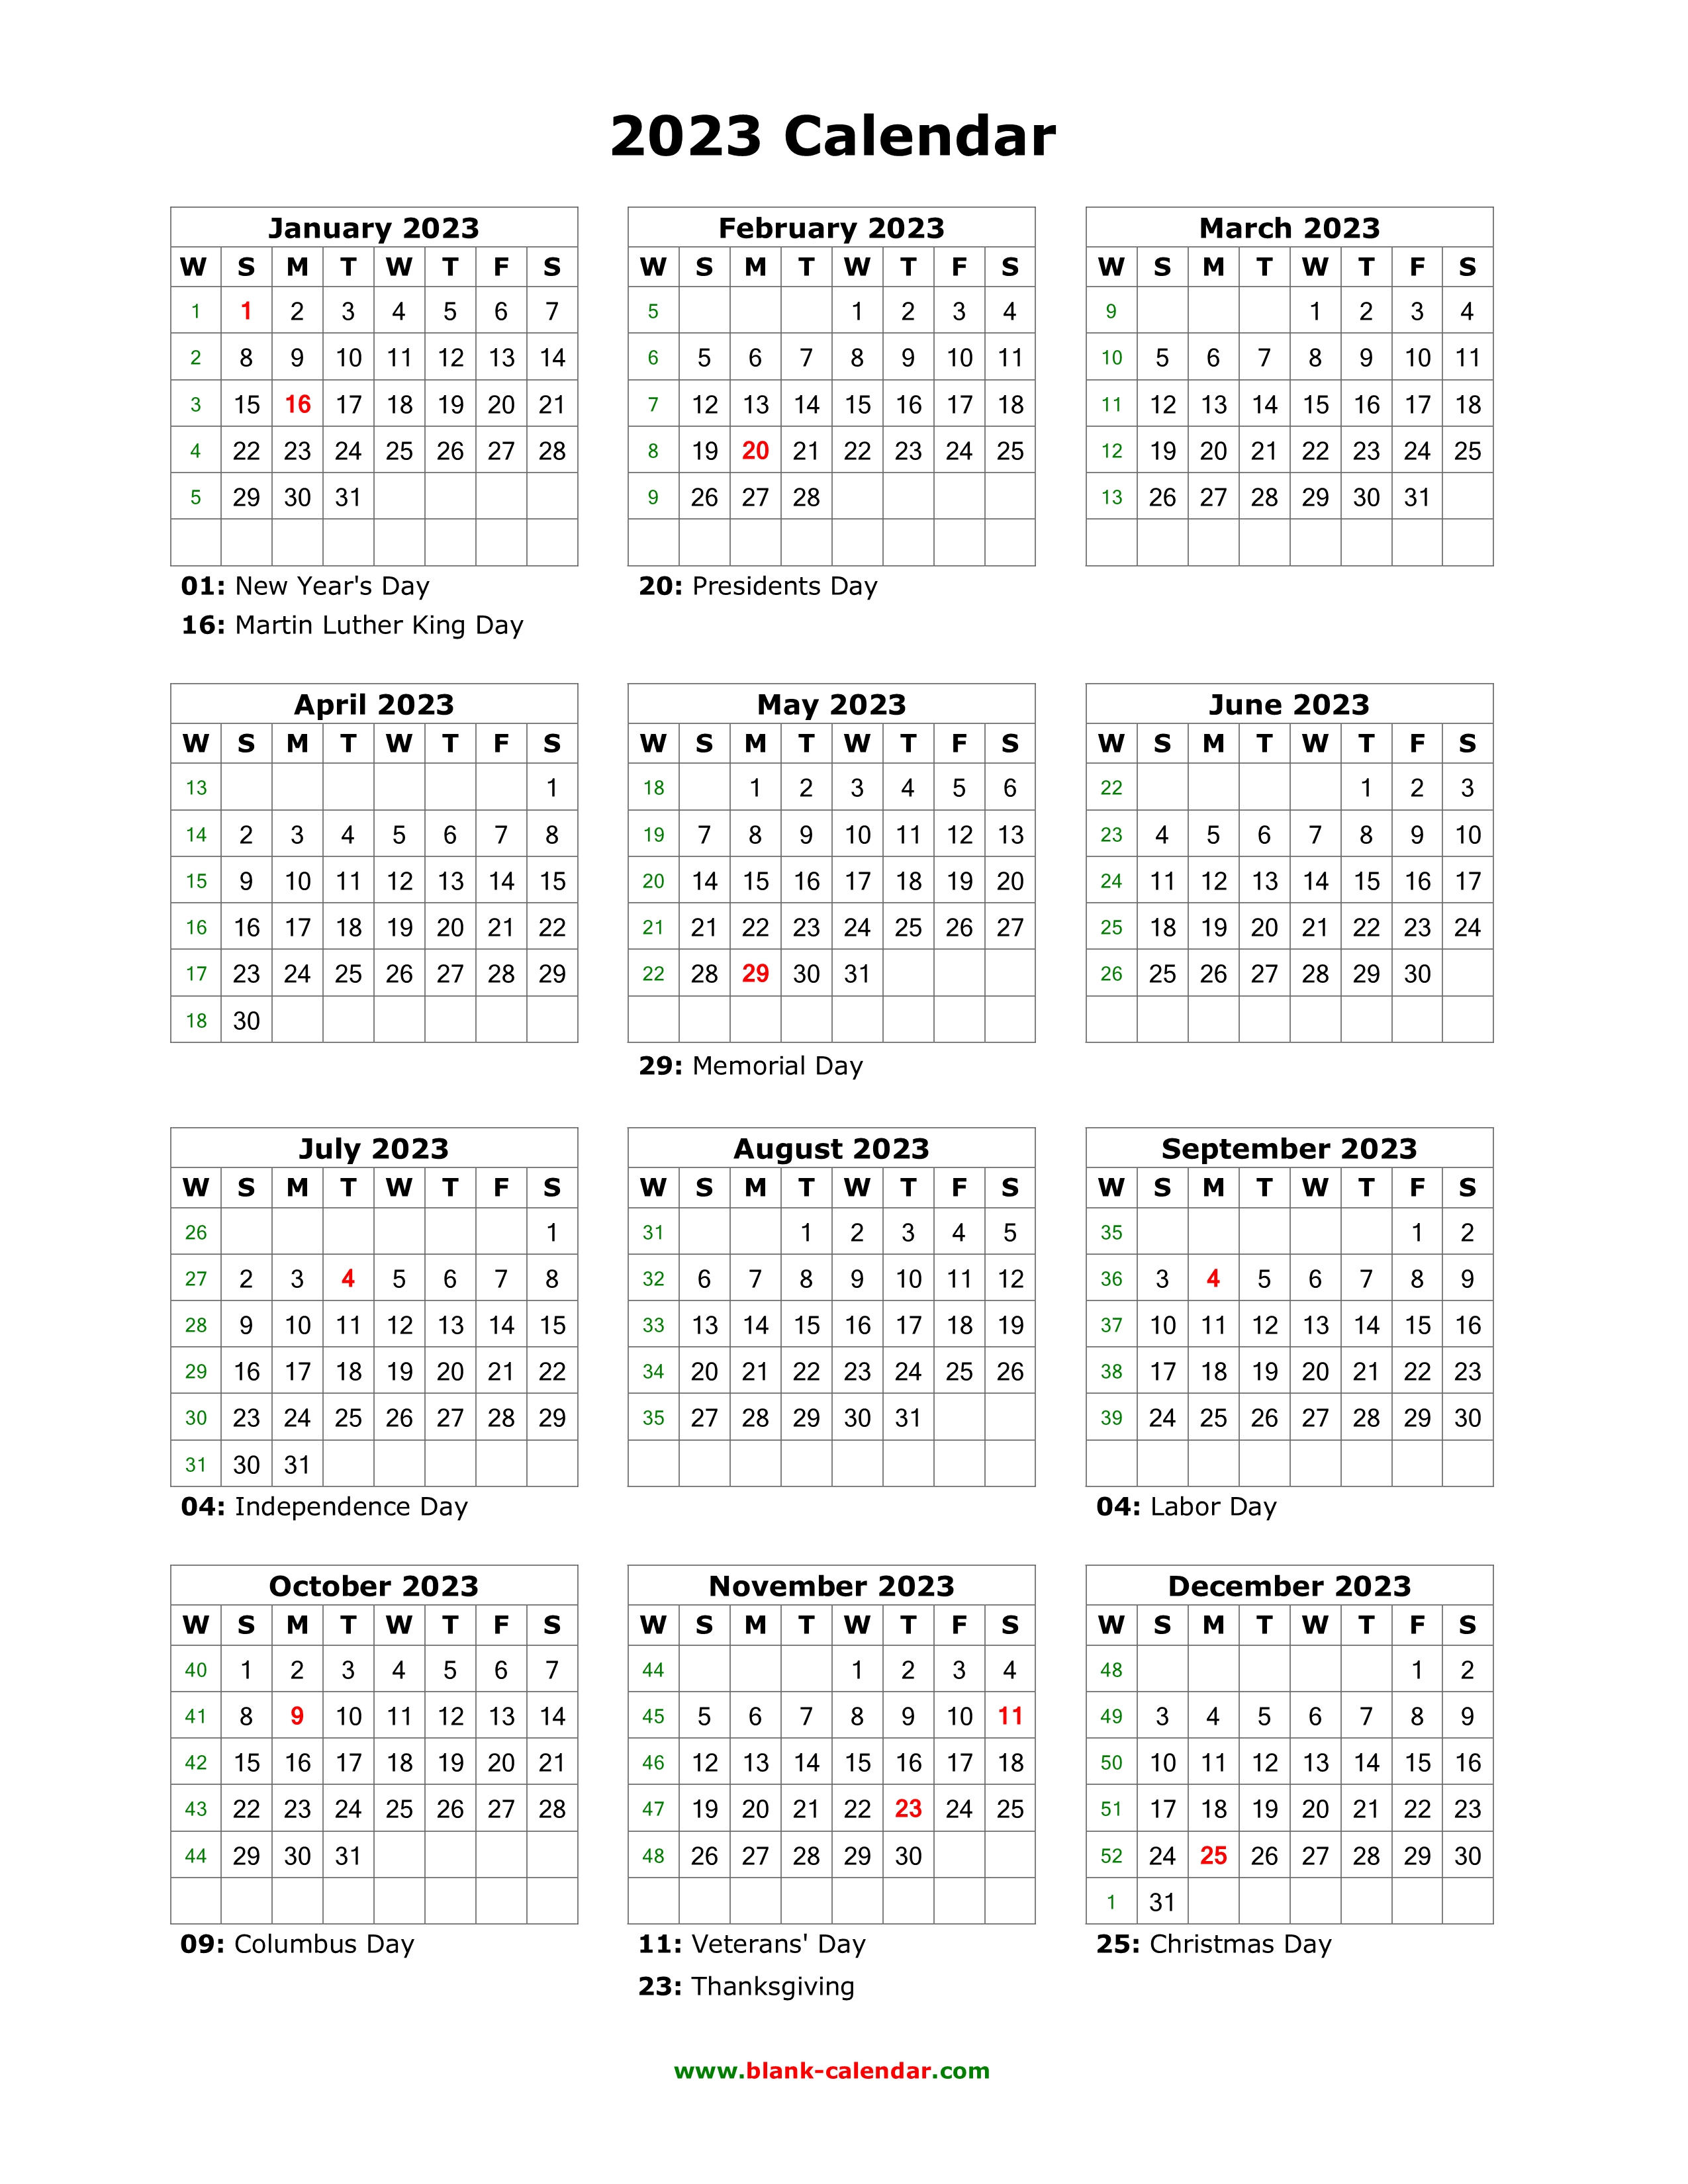 2023-calendar-templates-and-images-2023-united-states-calendar-with